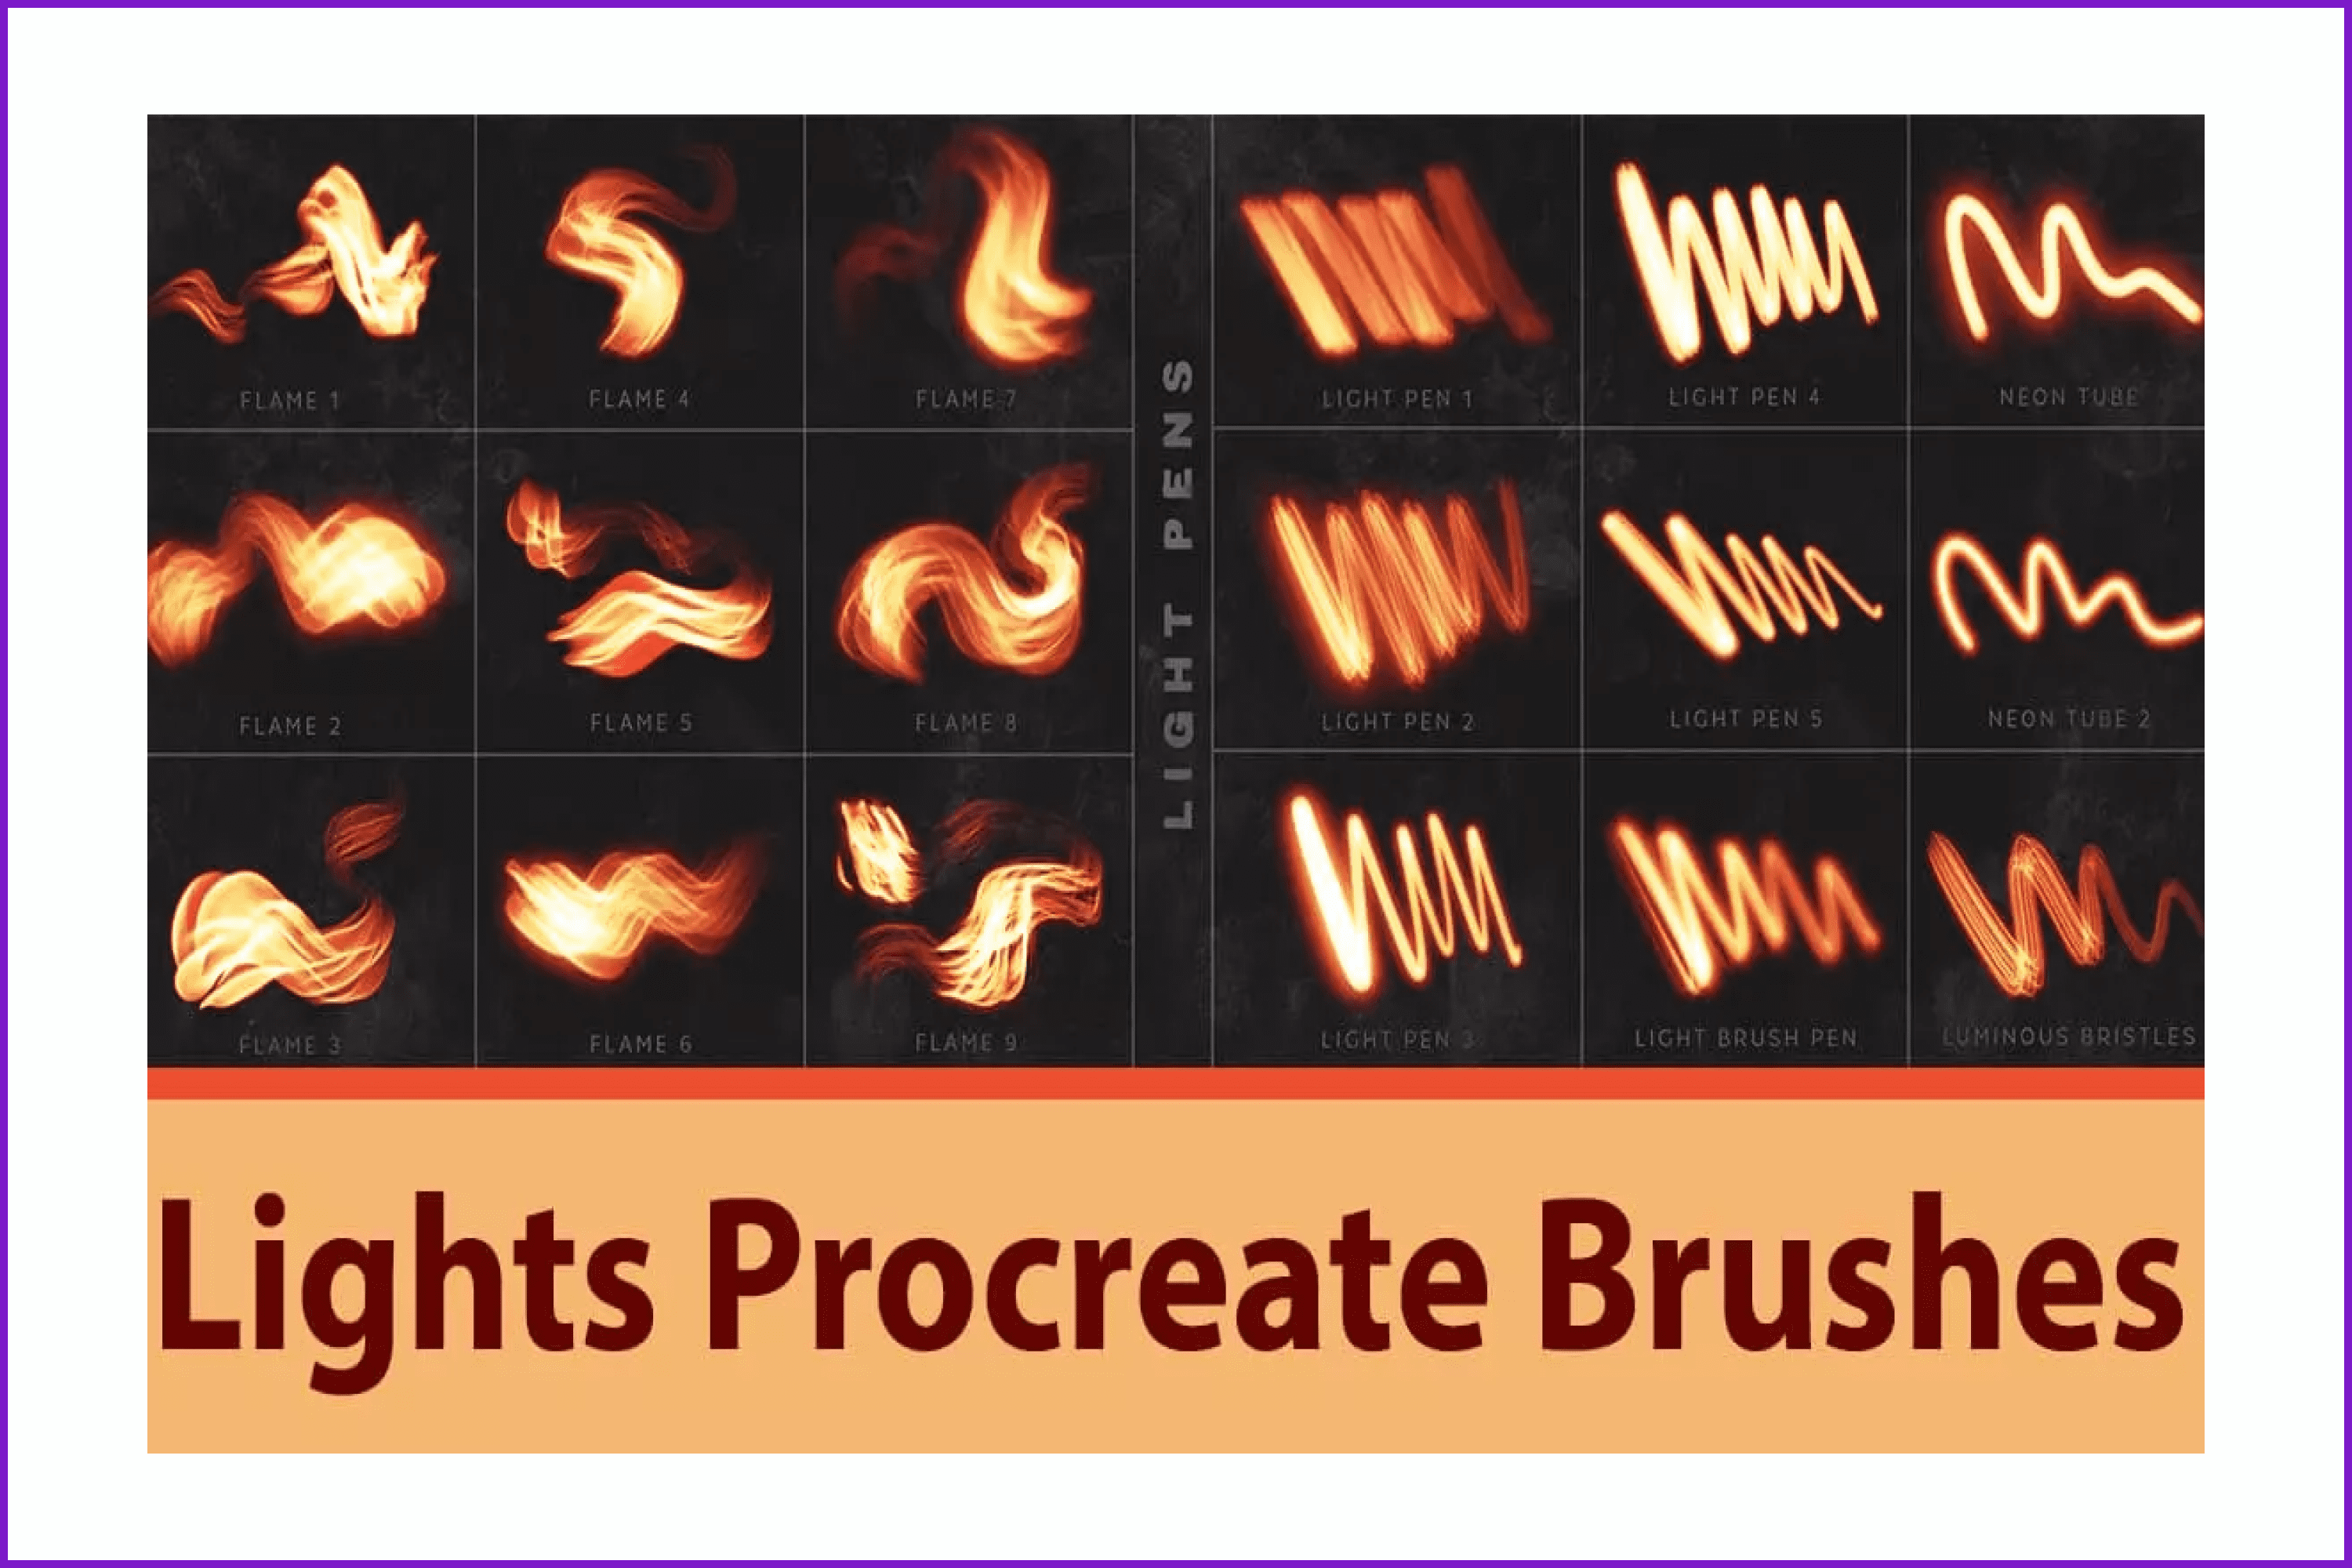 Examples of brushes painting fire on a black background.